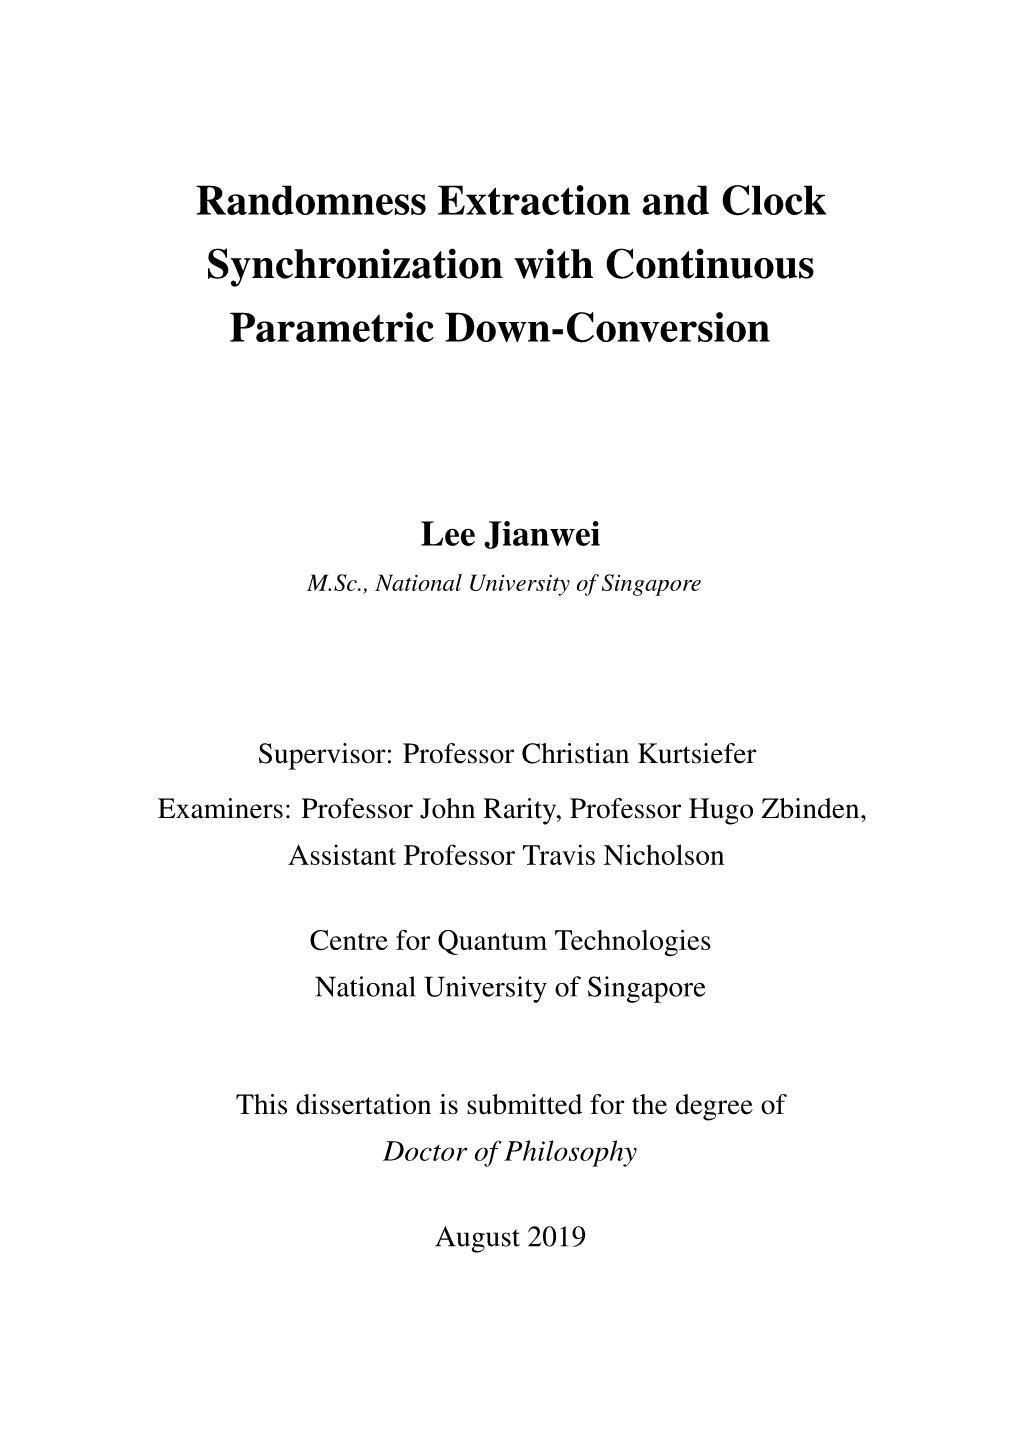 Randomness Extraction and Clock Synchronization with Continuous Parametric Down-Conversion